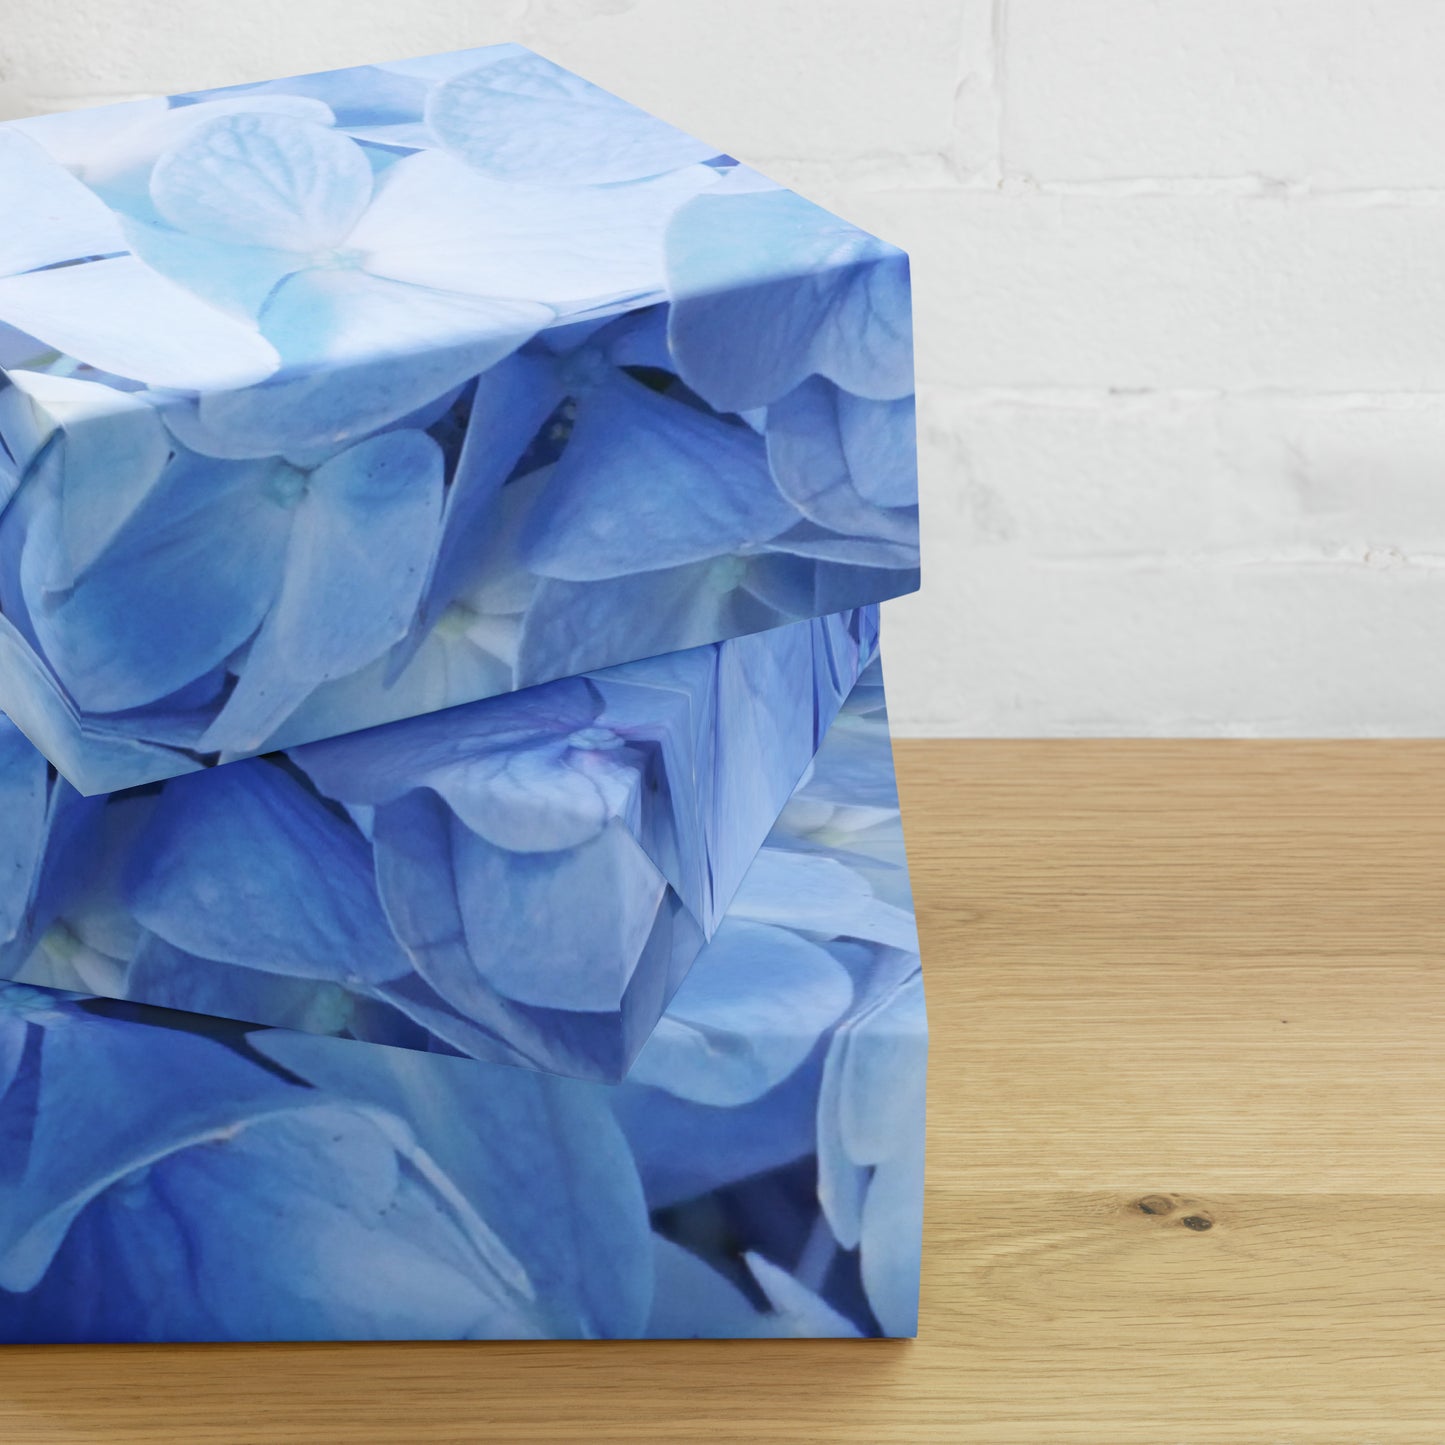 Blue Hydrangea Wrapping paper sheets